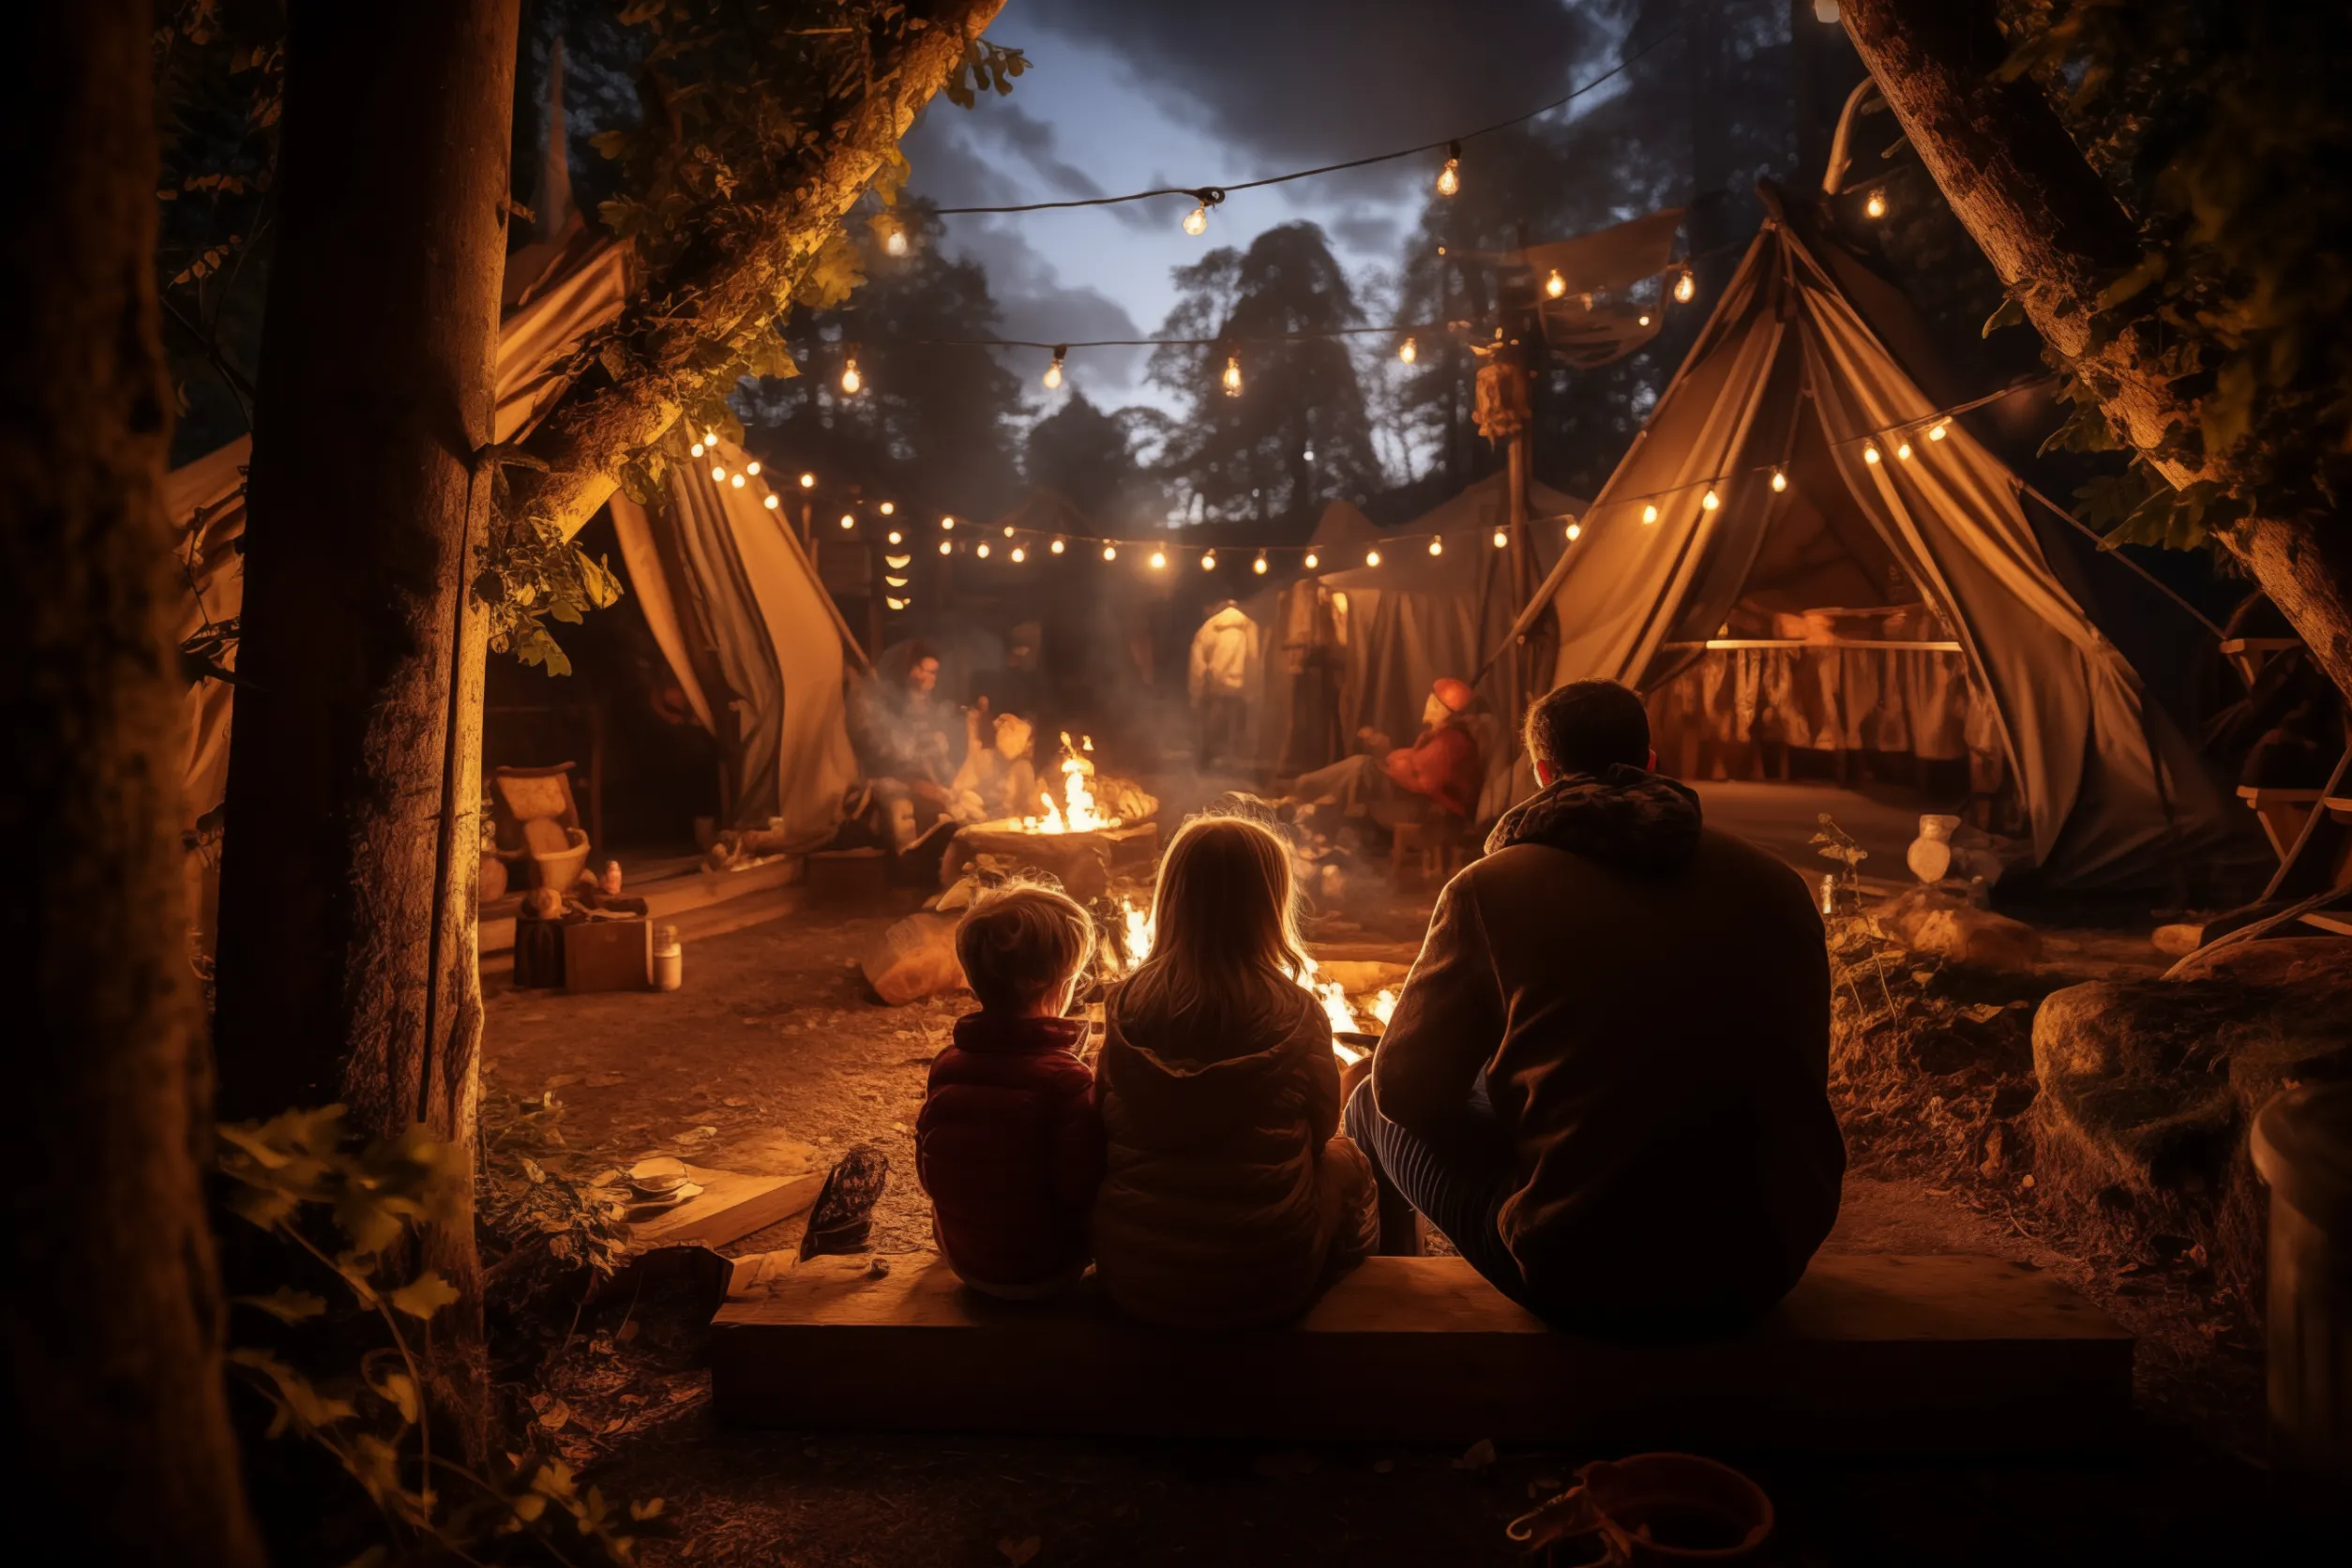 FAMILY CAMPING: MAKING YOUR OUTDOOR ADVENTURE MEMORABLE!